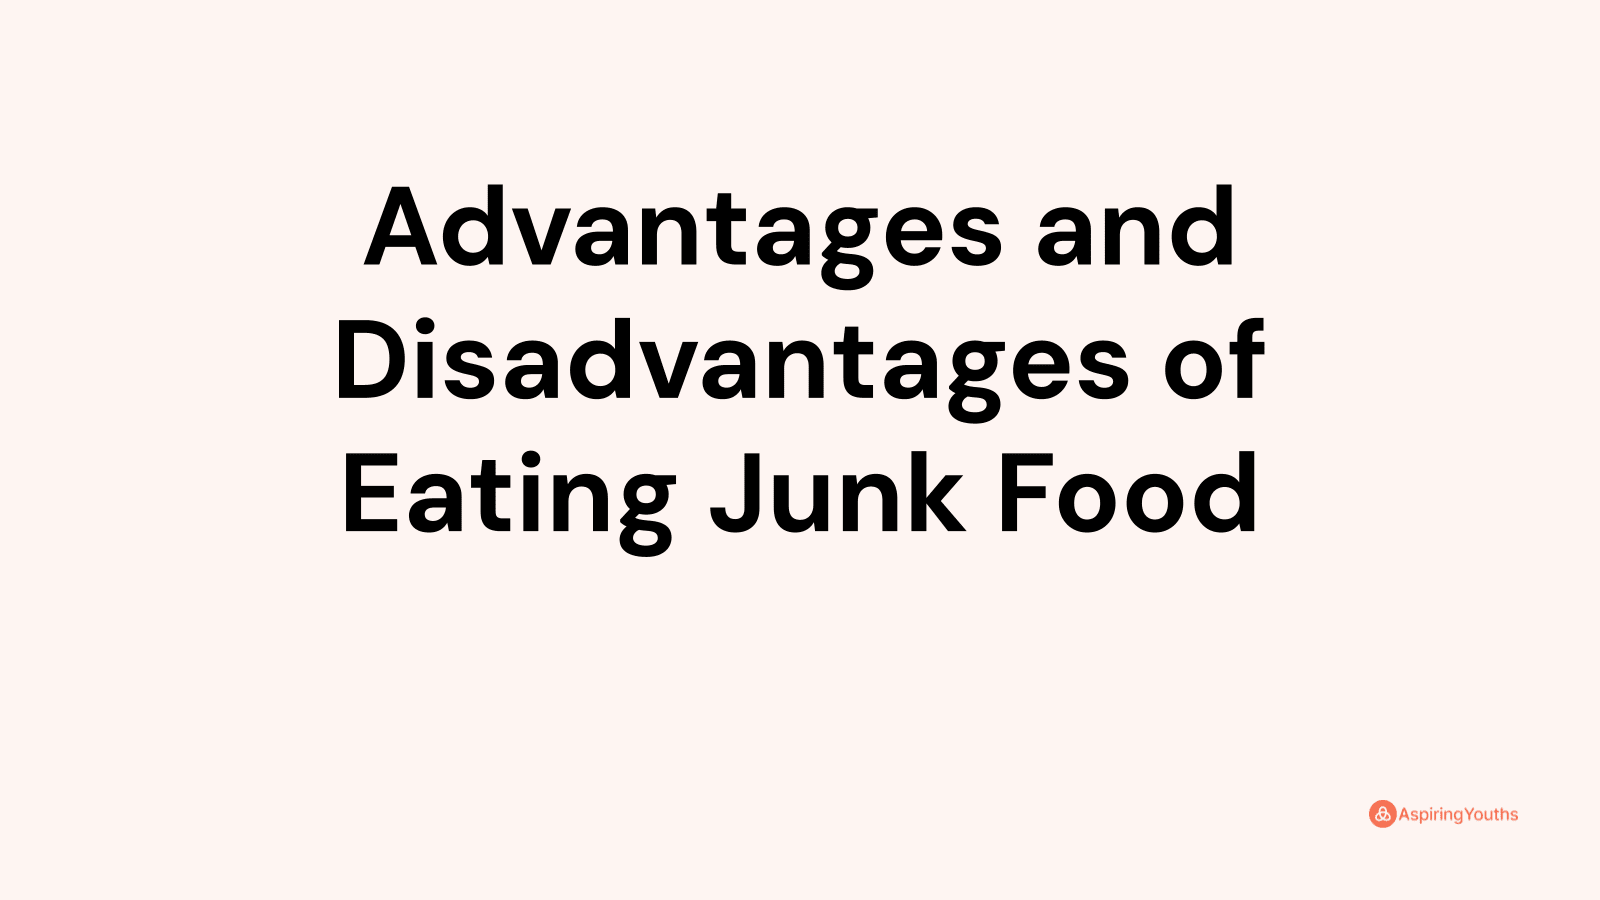 Advantages and disadvantages of Eating Junk Food